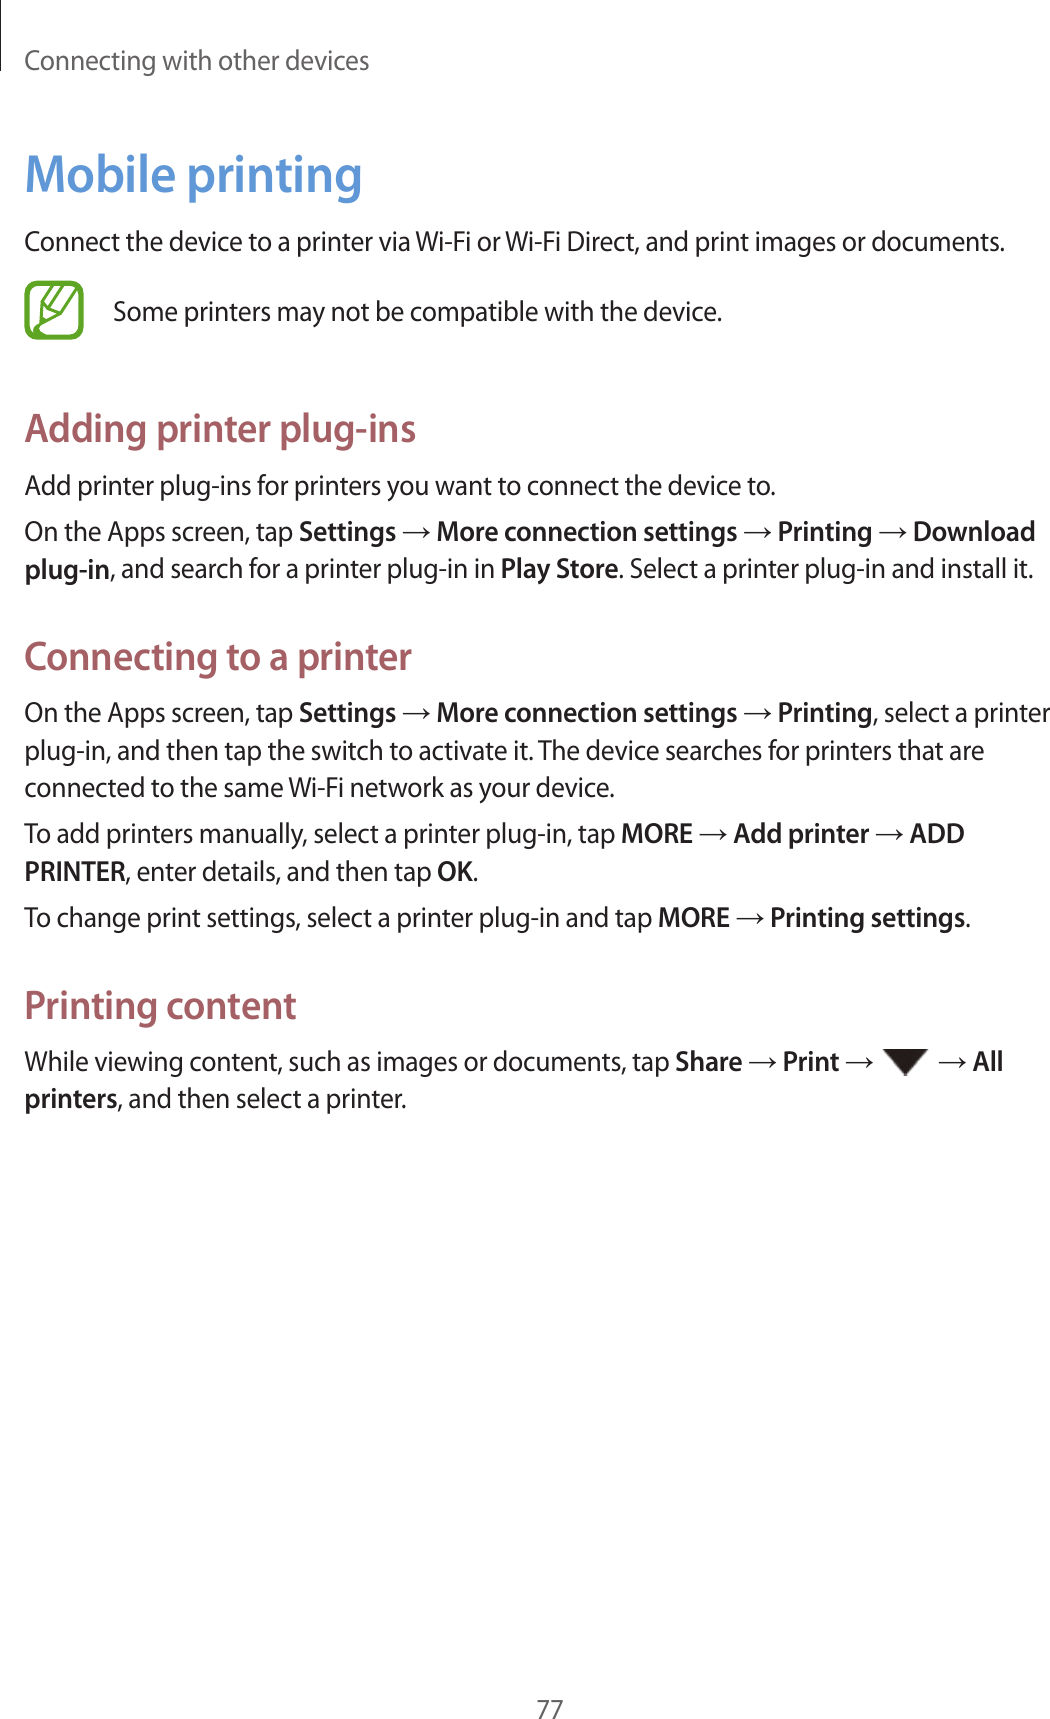 Connecting with other devices77Mobile printingConnect the device to a printer via Wi-Fi or Wi-Fi Direct, and print images or documents.Some printers may not be compatible with the device.Adding printer plug-insAdd printer plug-ins for printers you want to connect the device to.On the Apps screen, tap Settings → More connection settings → Printing → Download plug-in, and search for a printer plug-in in Play Store. Select a printer plug-in and install it.Connecting to a printerOn the Apps screen, tap Settings → More connection settings → Printing, select a printer plug-in, and then tap the switch to activate it. The device searches for printers that are connected to the same Wi-Fi network as your device.To add printers manually, select a printer plug-in, tap MORE → Add printer → ADD PRINTER, enter details, and then tap OK.To change print settings, select a printer plug-in and tap MORE → Printing settings.Printing contentWhile viewing content, such as images or documents, tap Share → Print →   → All printers, and then select a printer.